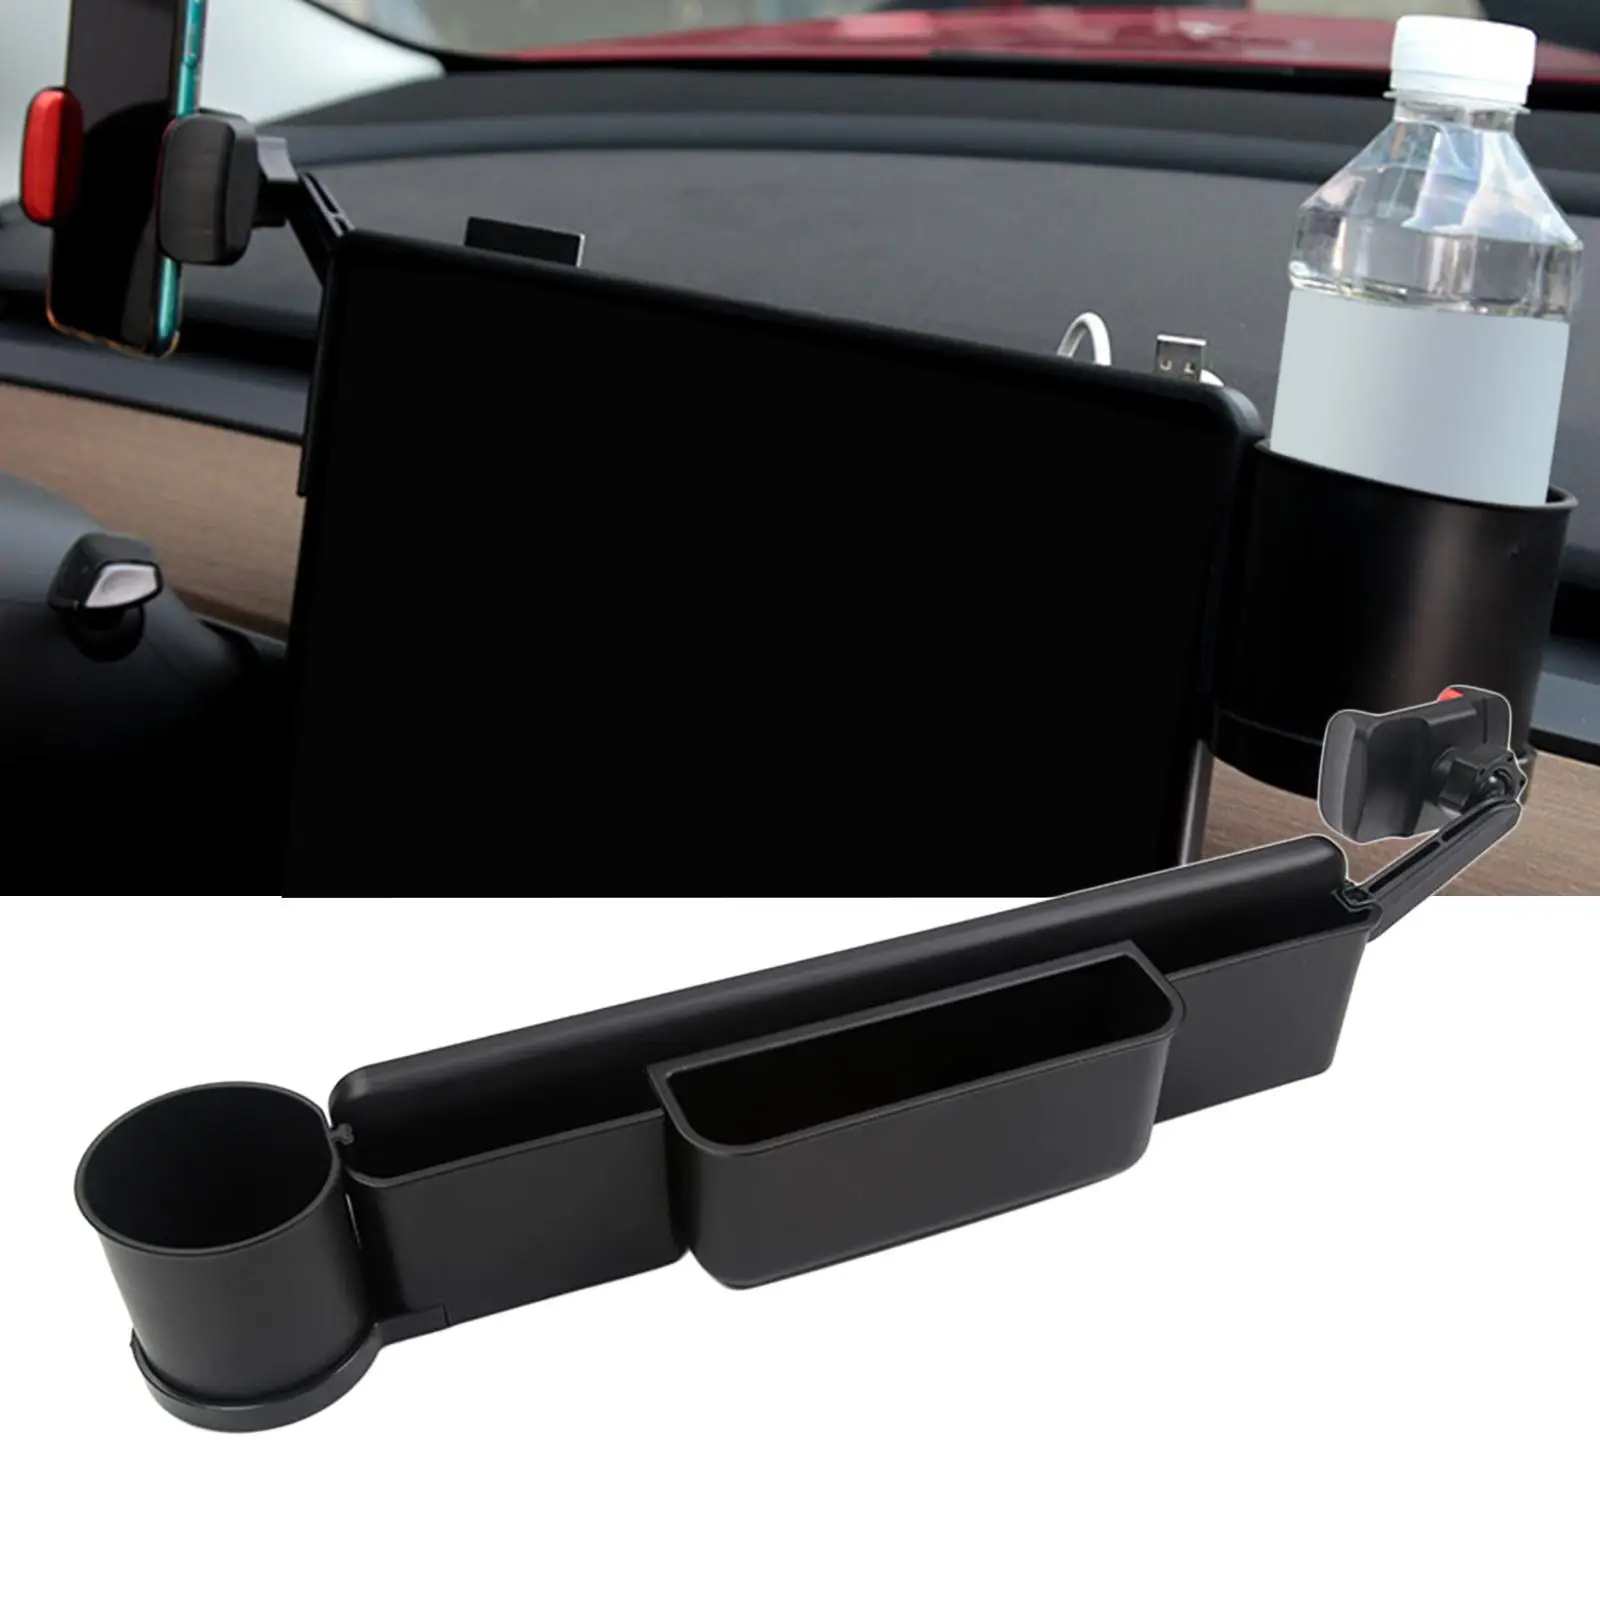 Car Phone Mount Stand Multifunction Drinks Holder Fits for/Y